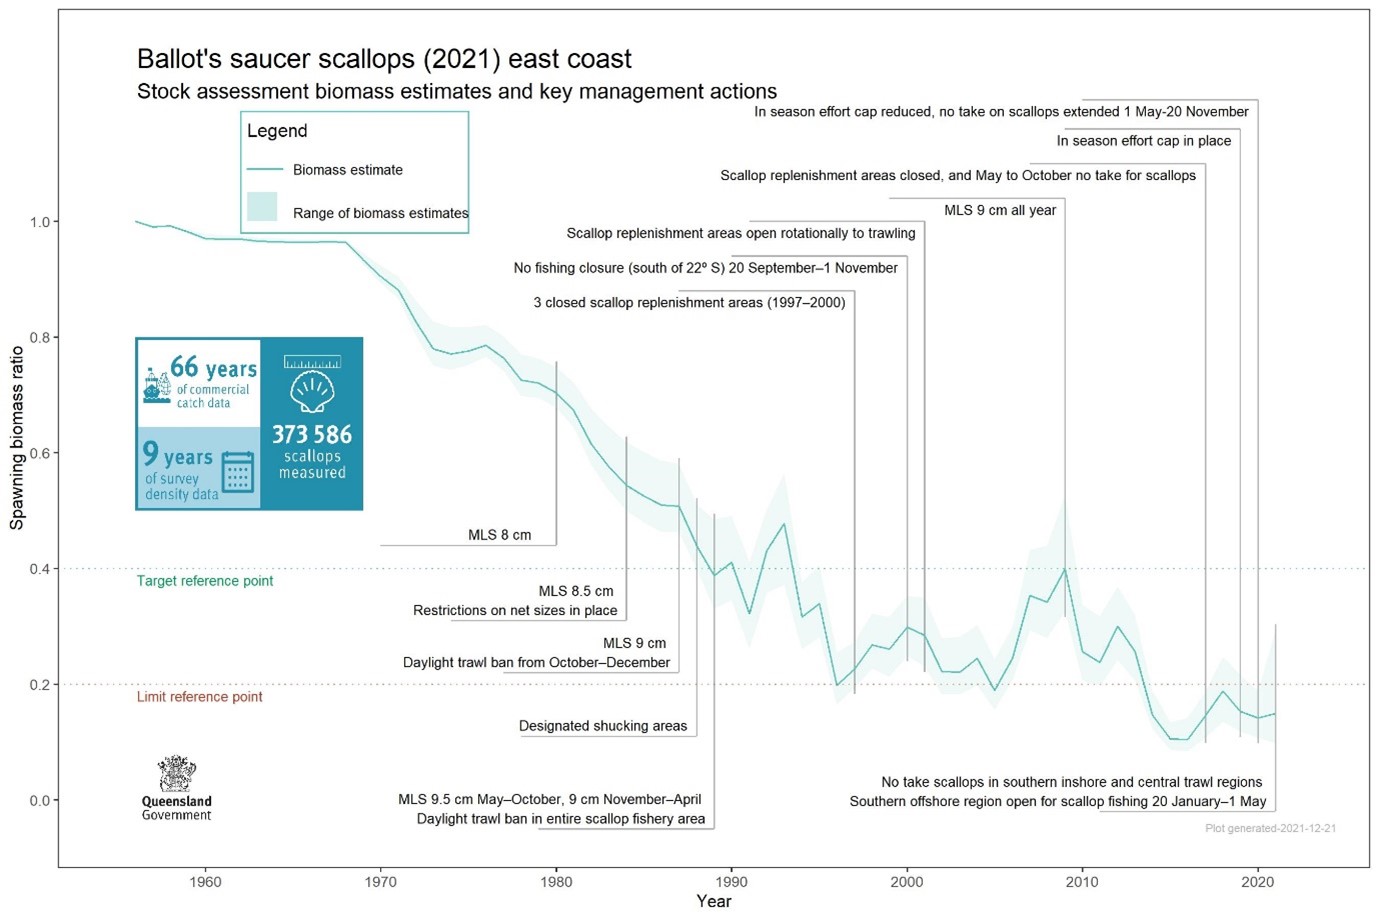 The chart presents the biomass ratio of Ballot’s saucer scallop from 1956 to 2021. The ratio is relative to 1 in 1956. Data used in the stock assessment includes 66 years of commercial catch data, 373 586 scallops measured and includes 9 years of survey density data. 